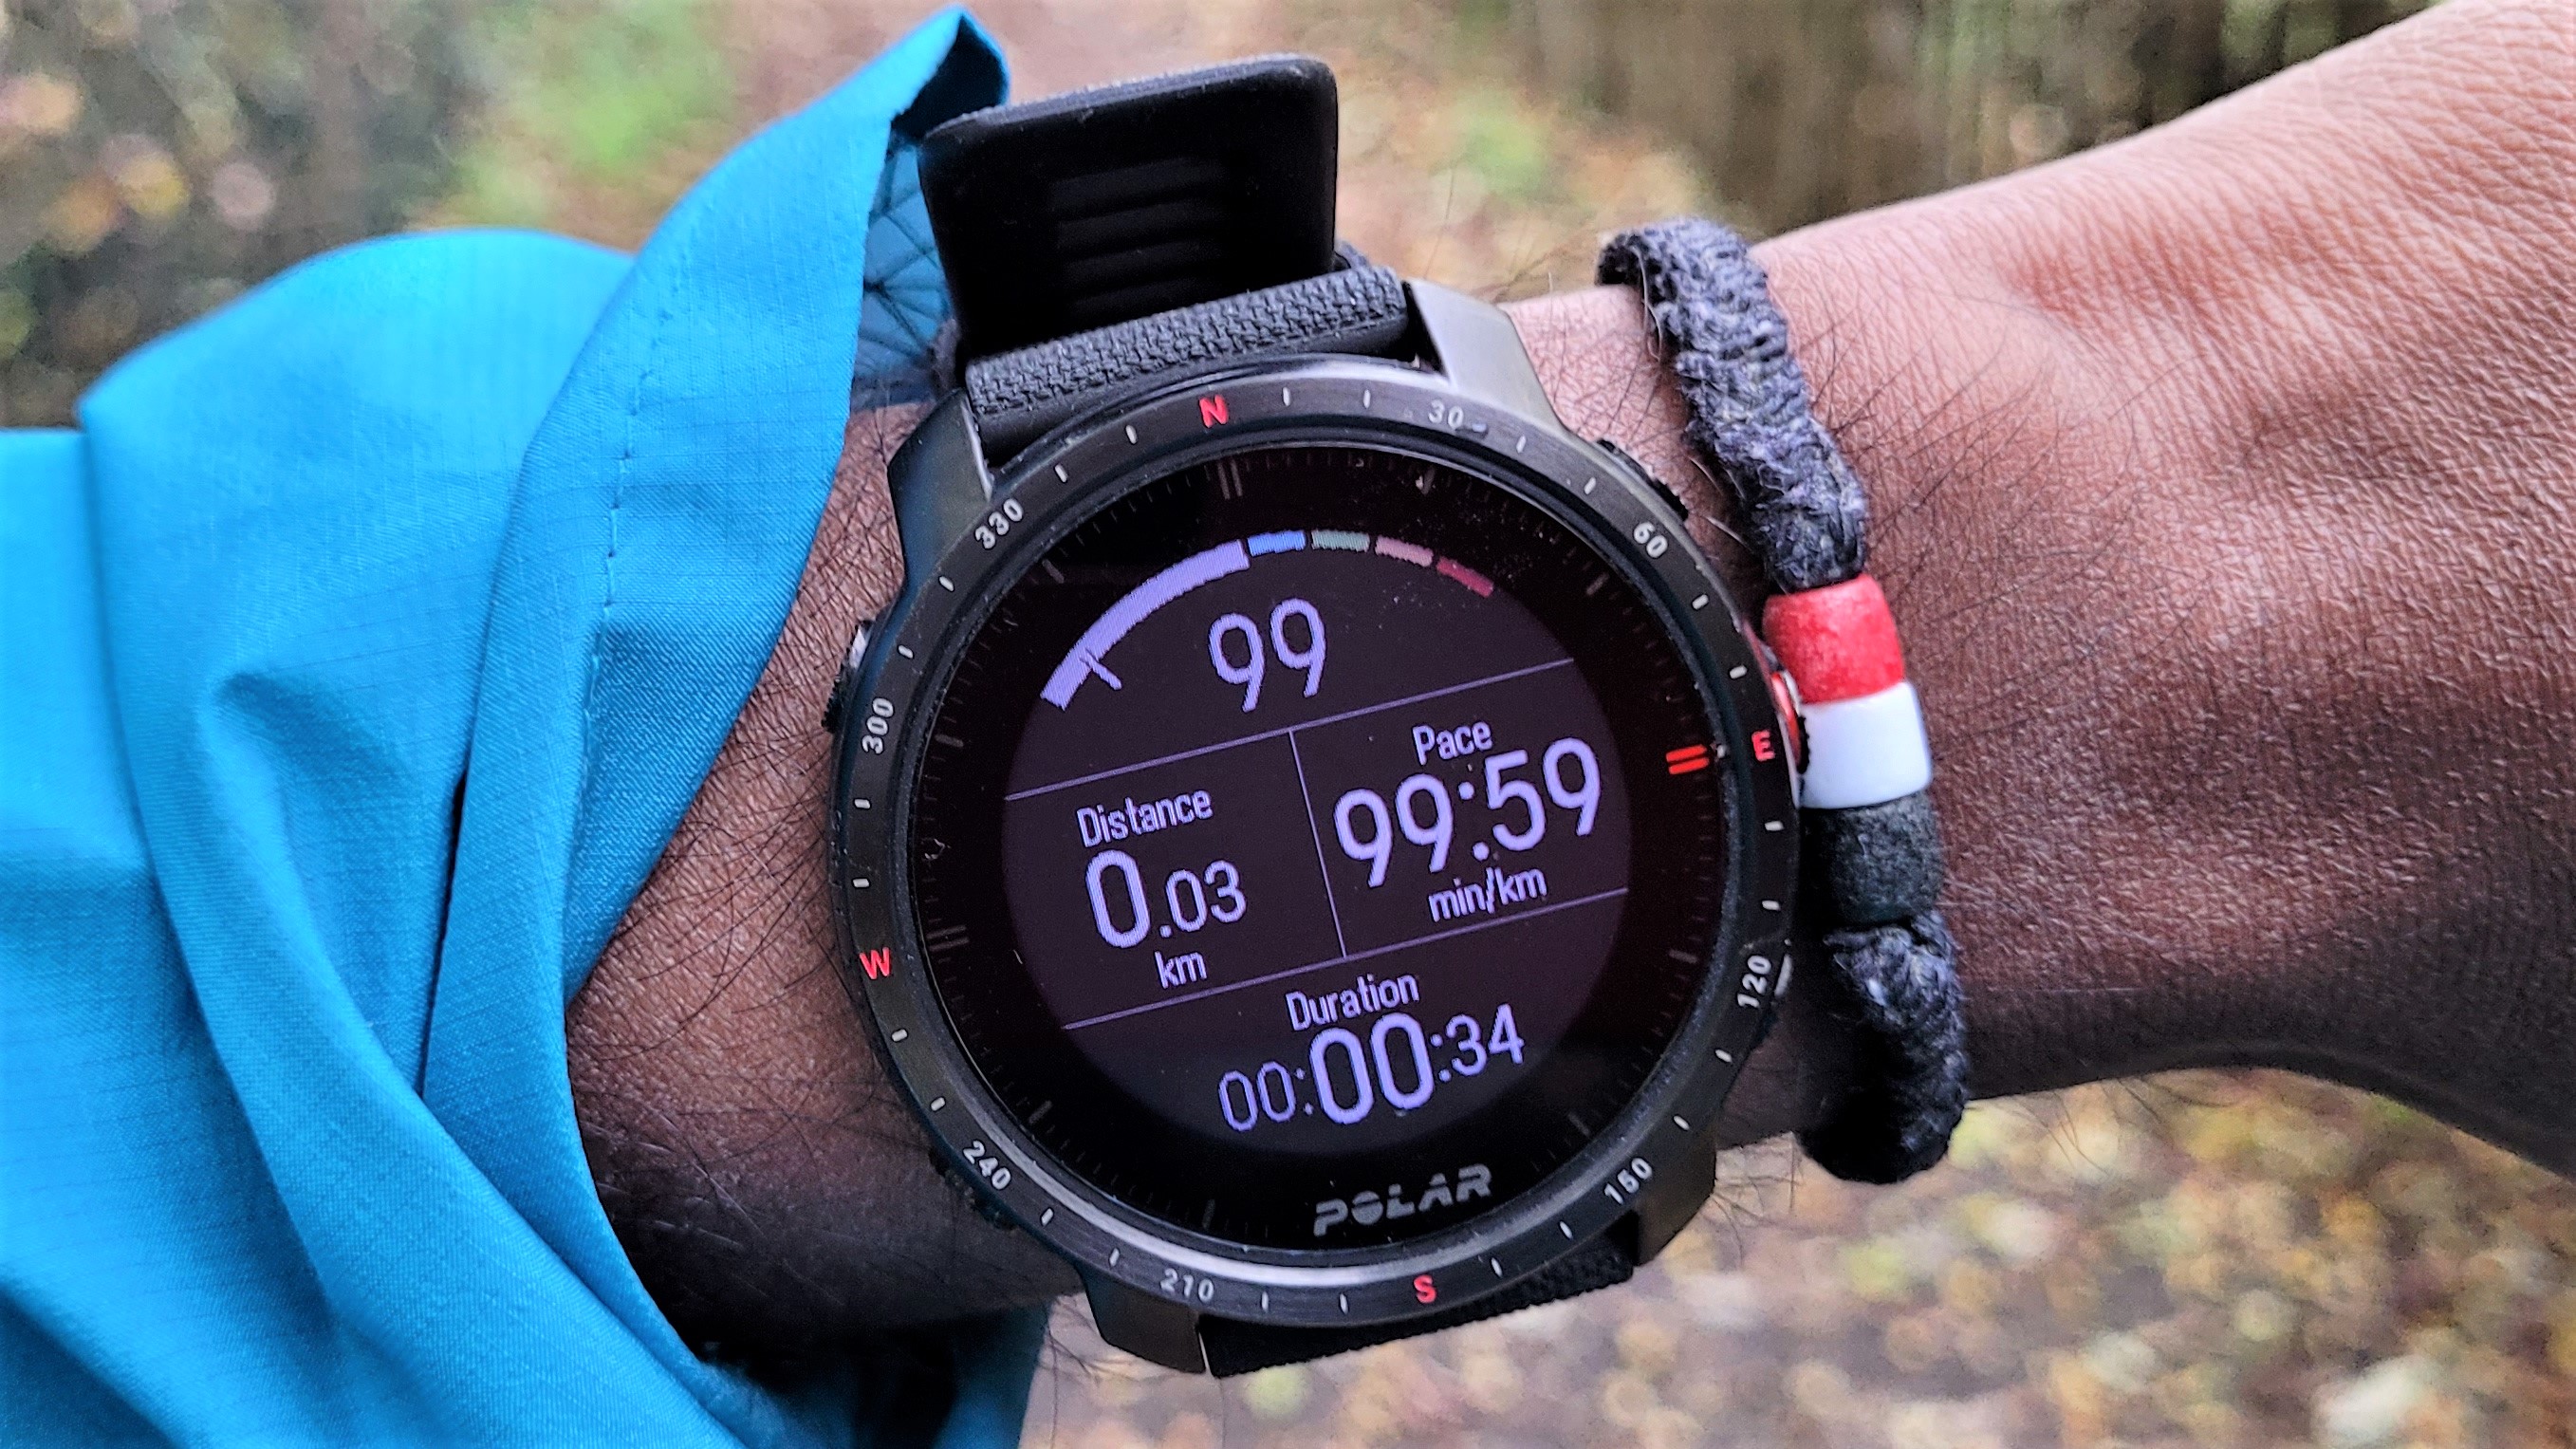 Workout stats on the Polar Grit X Pro